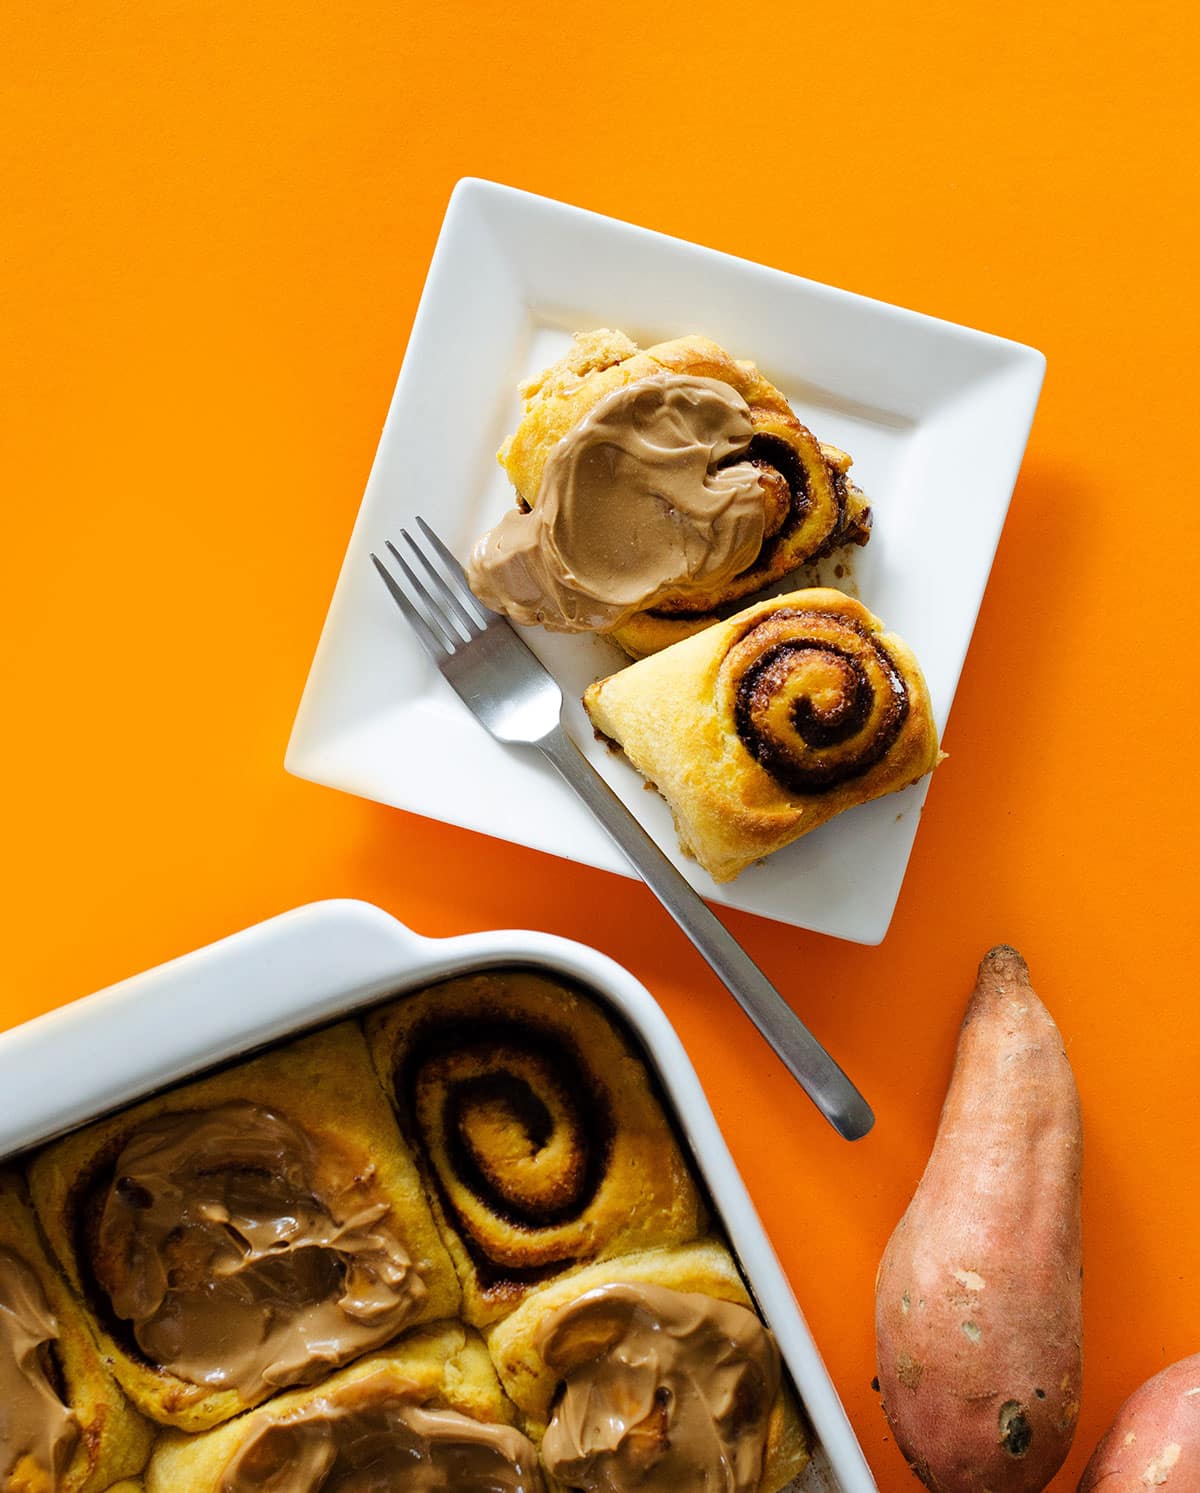 Cinnamon rolls on a plate with a fork - Fluffy, decadent, in slathered in a simple brown sugar cream cheese frosting, these Sweet Potato Cinnamon Rolls are the perfect way to wake up.